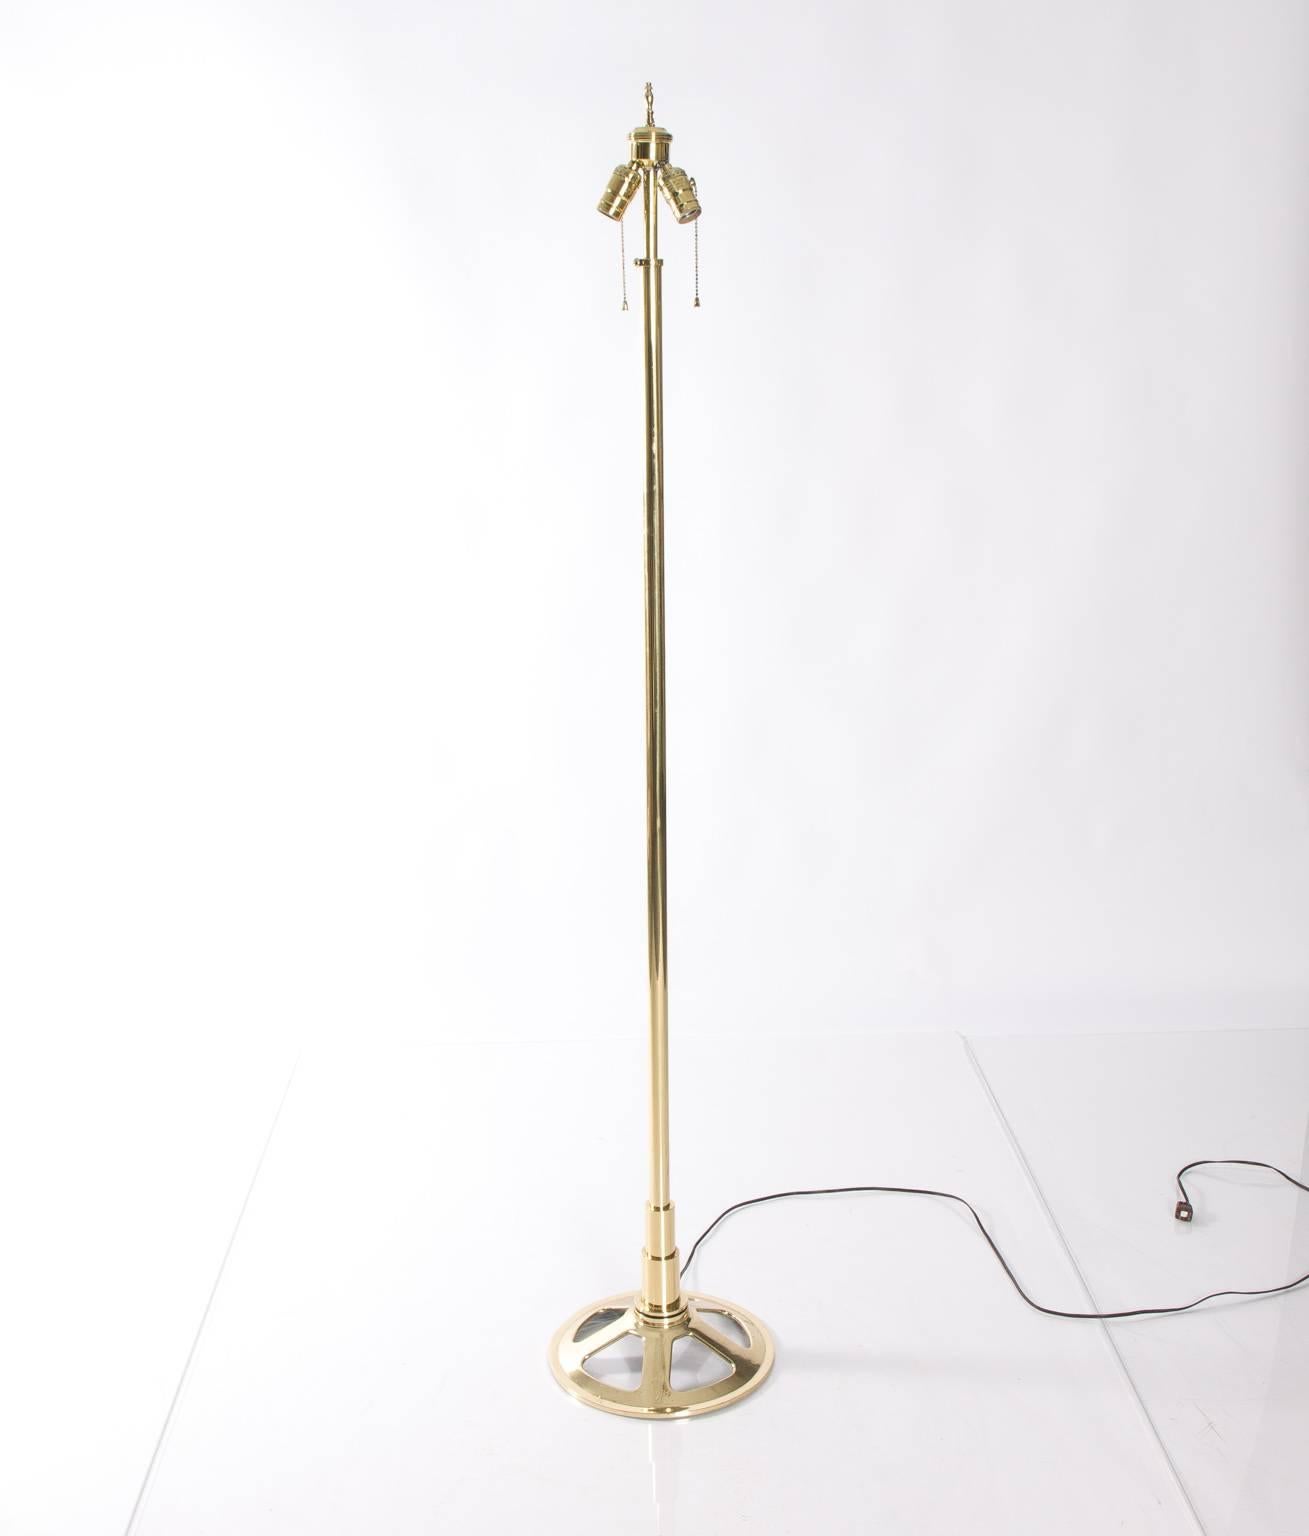 Heavy Industrial style brass floor lamp. Shade not included.
        